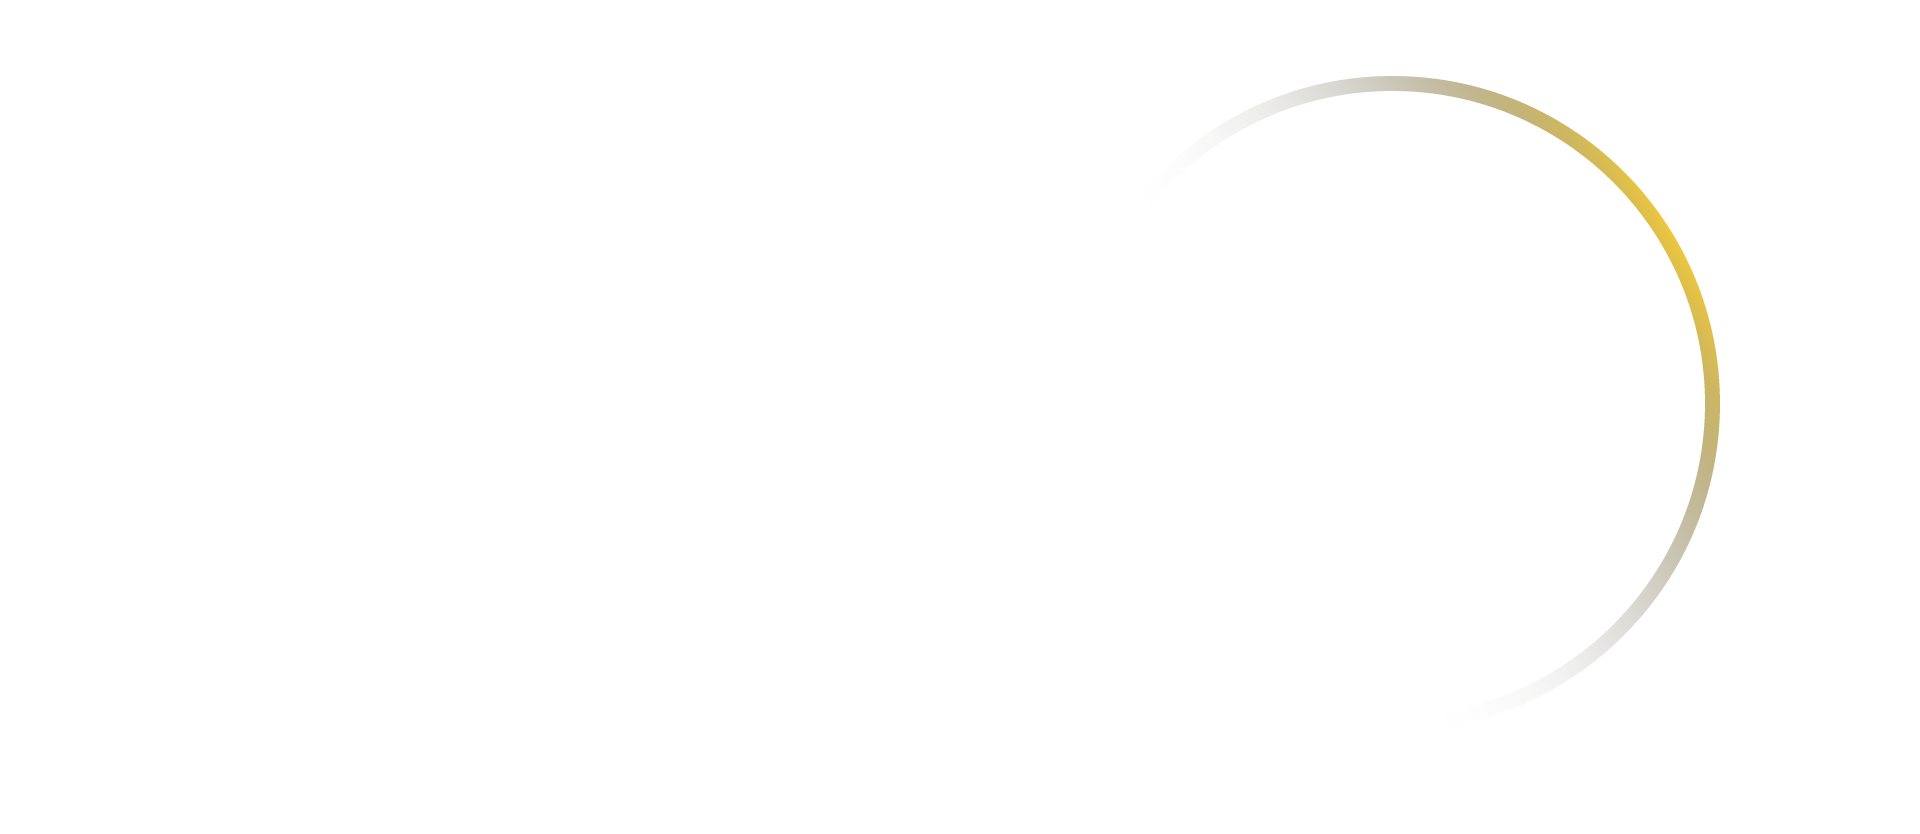 We would never ghost you